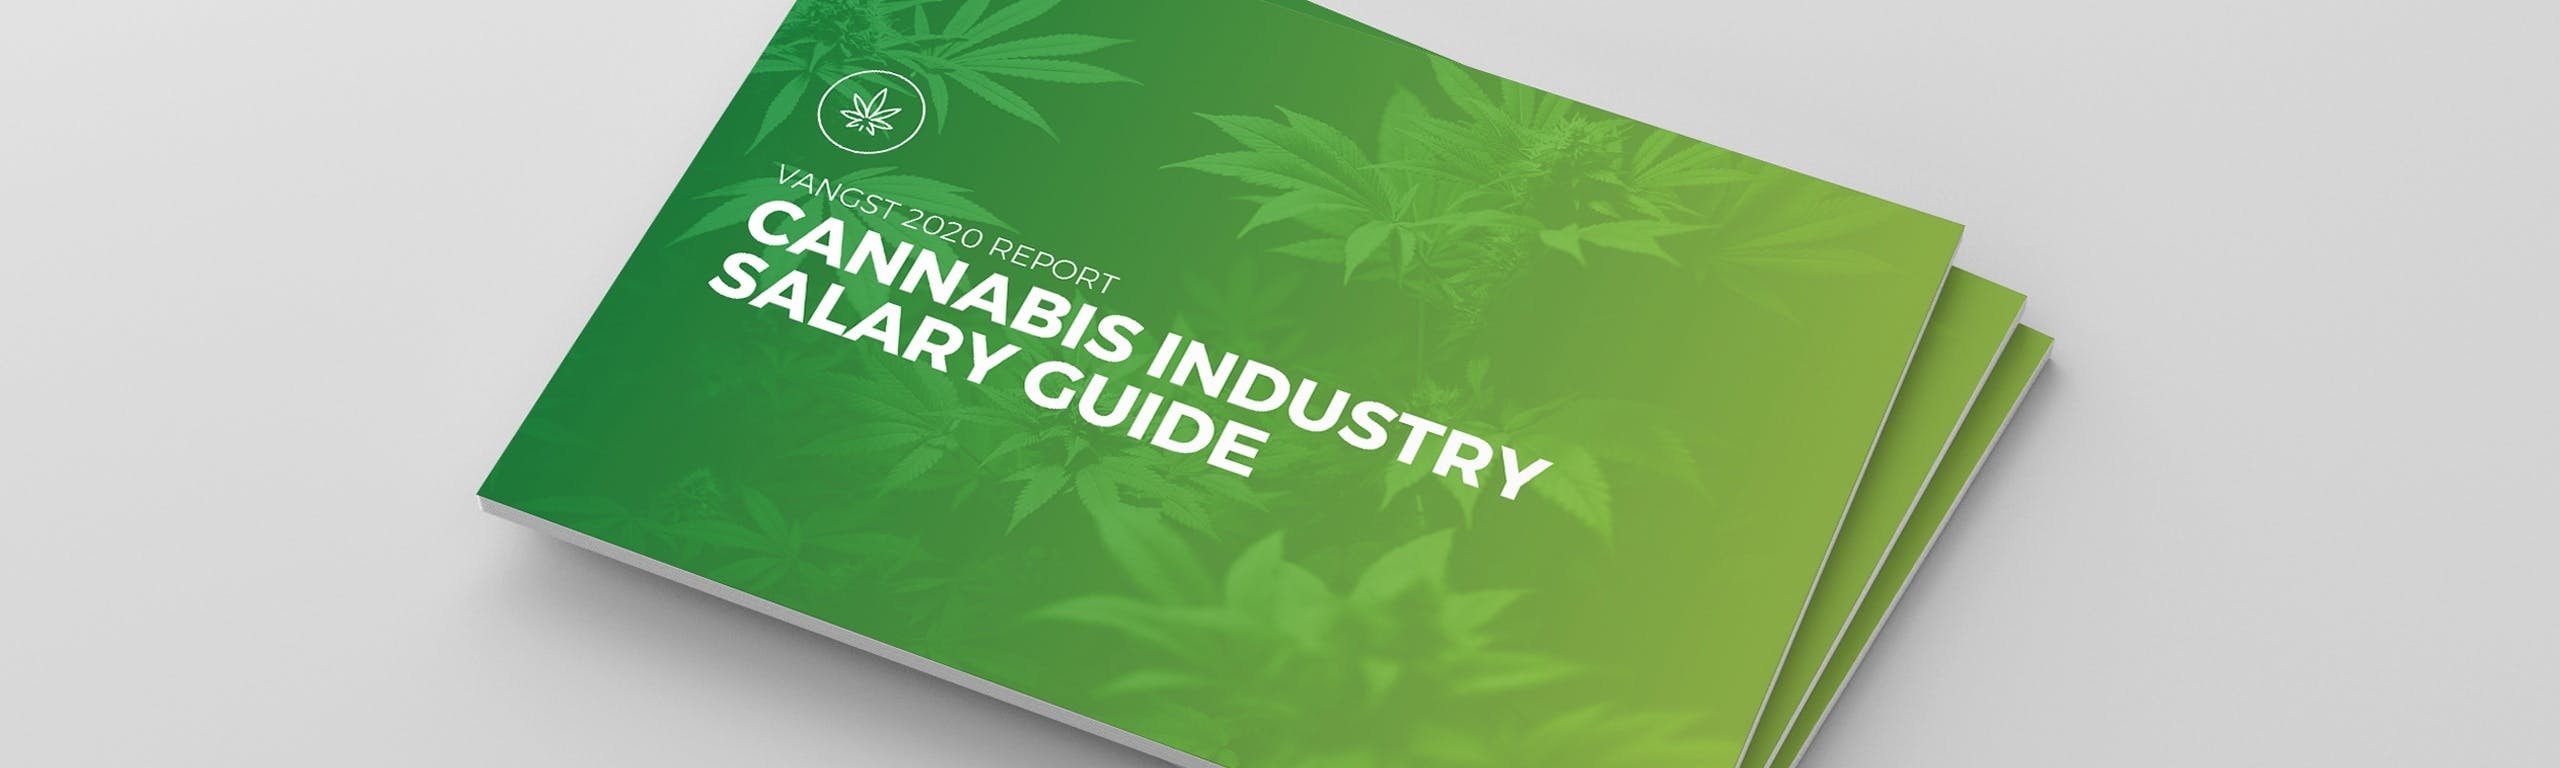 2020 Cannabis Industry Salary Guide